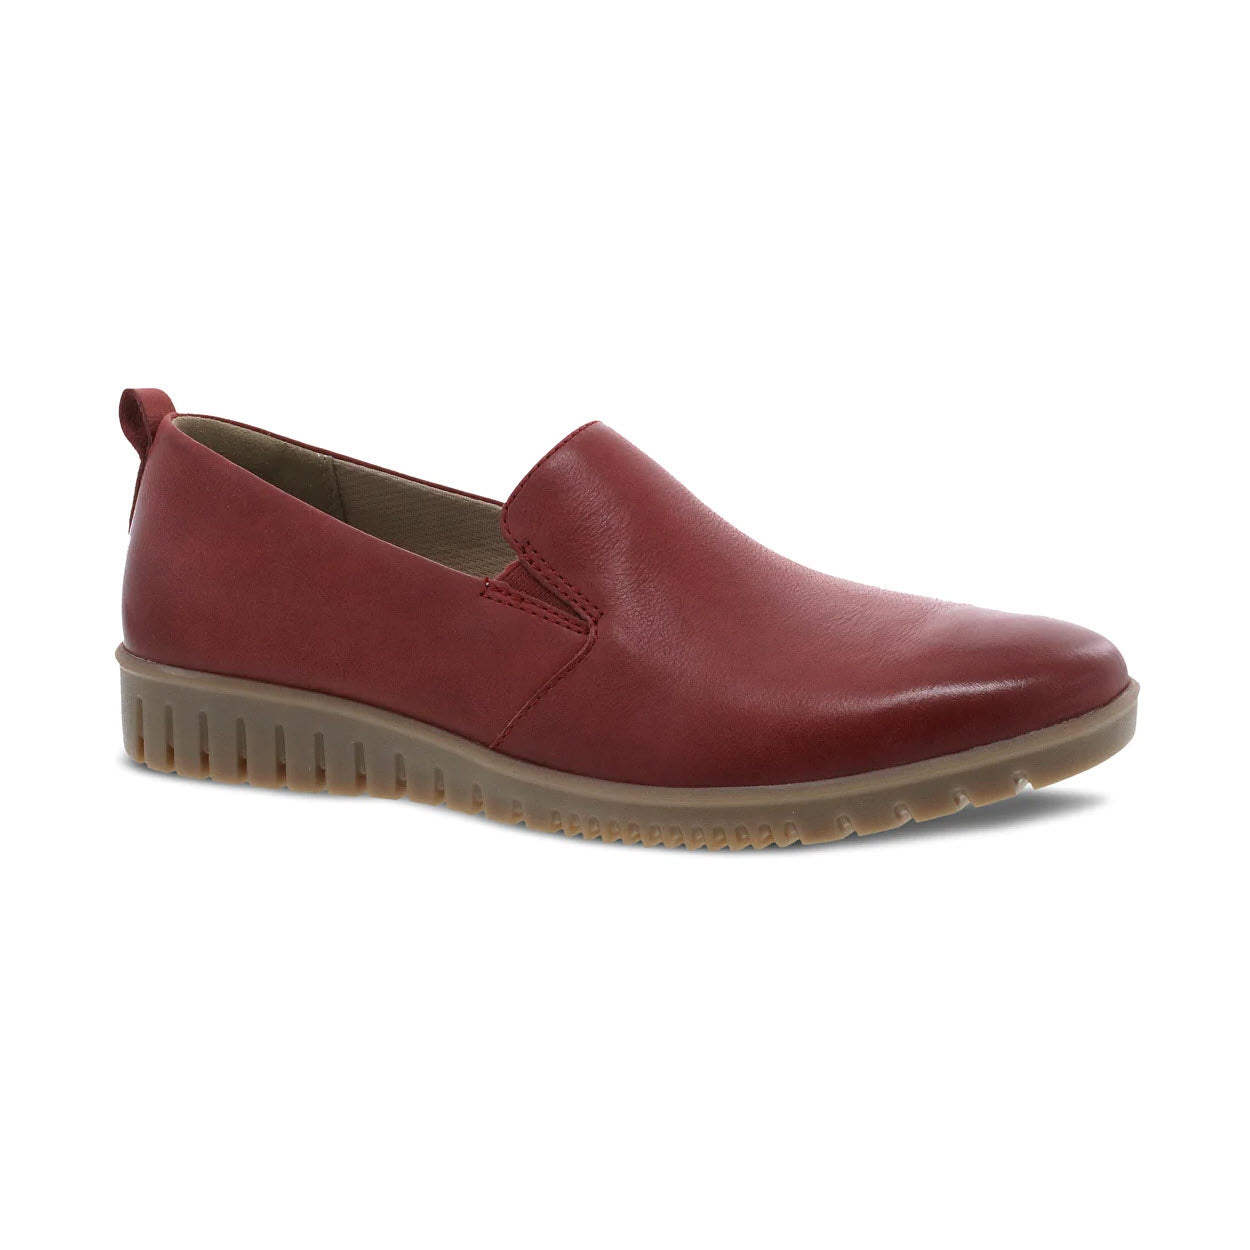 A single Dansko Linley Red Burnished slip-on shoe crafted from buttery soft leathers, with a smooth finish and a thick, ridged rubber sole, isolated on a white background.